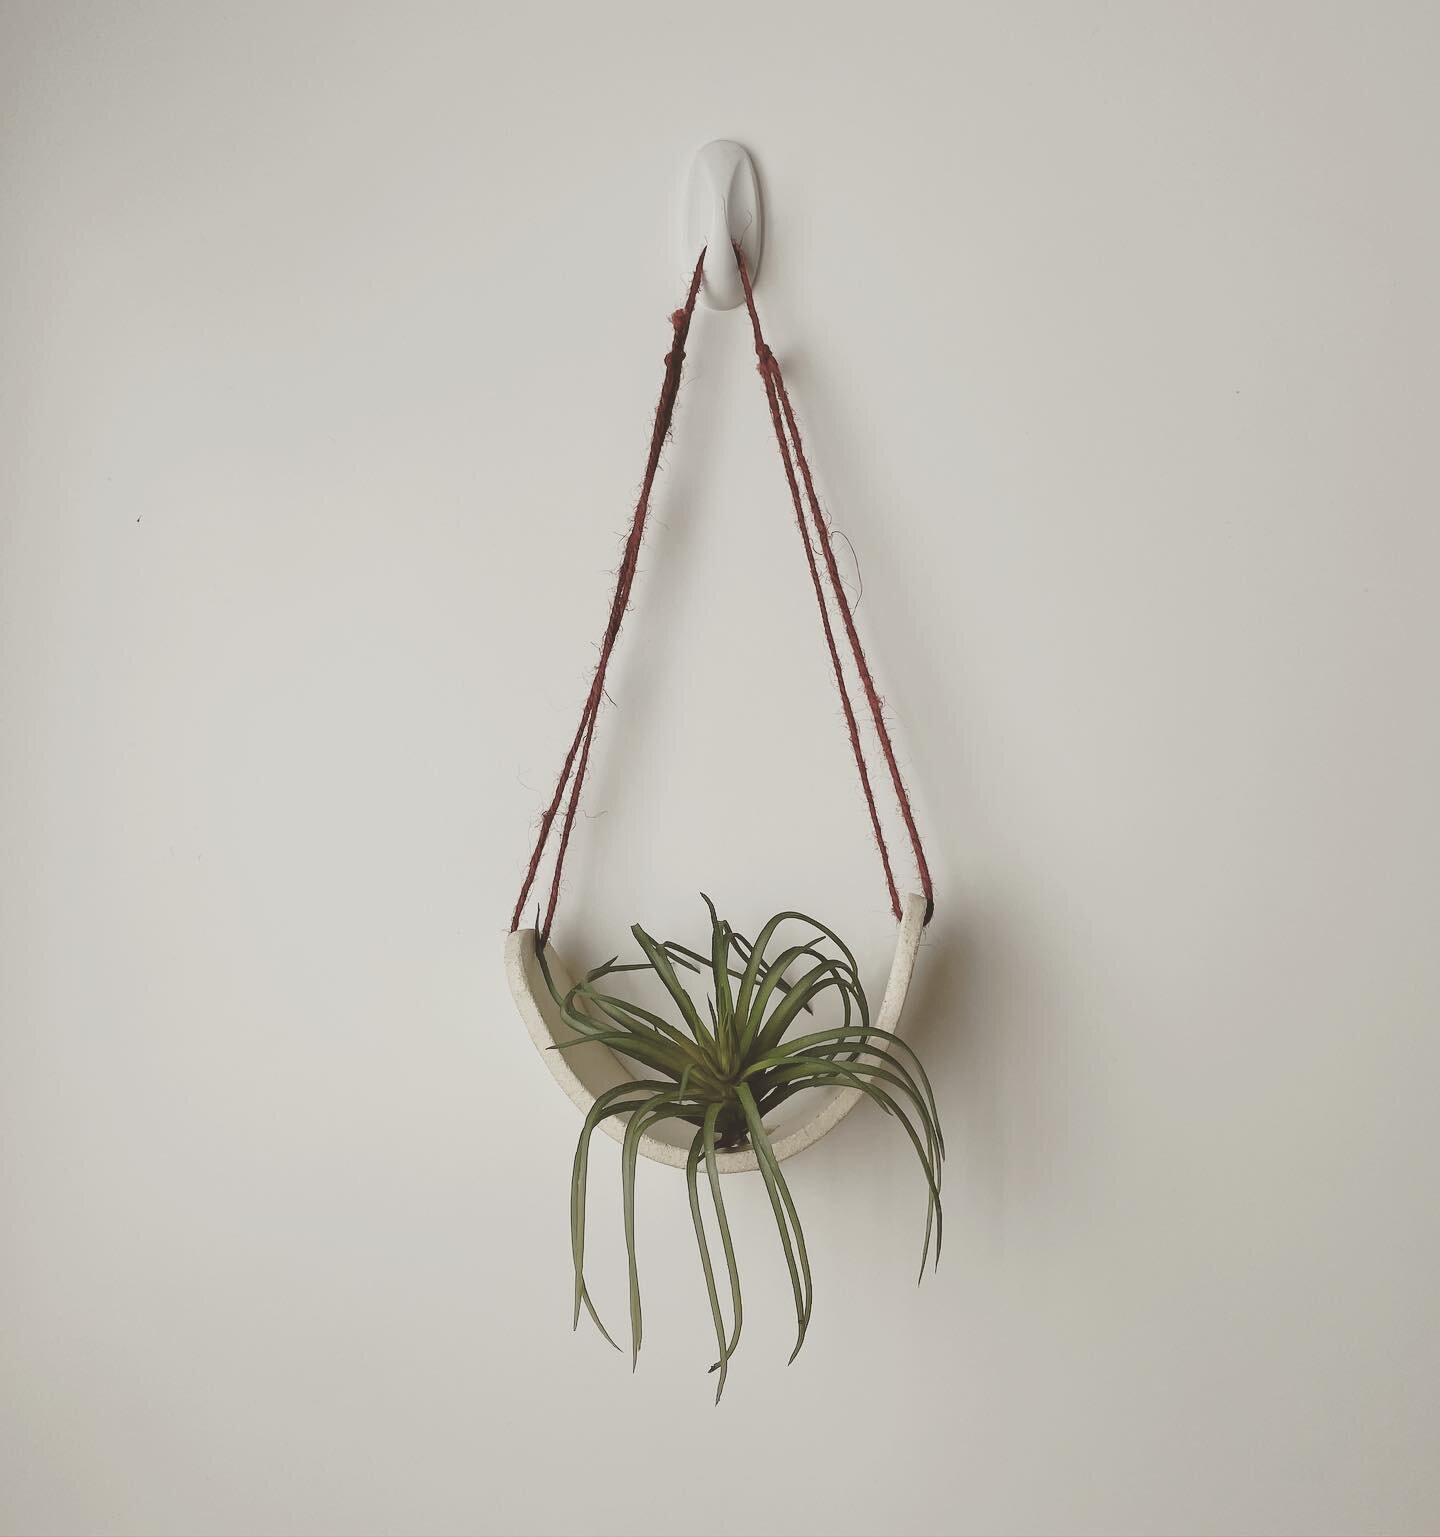 Adjustable height airplant holder.  #airplant #wallhanger